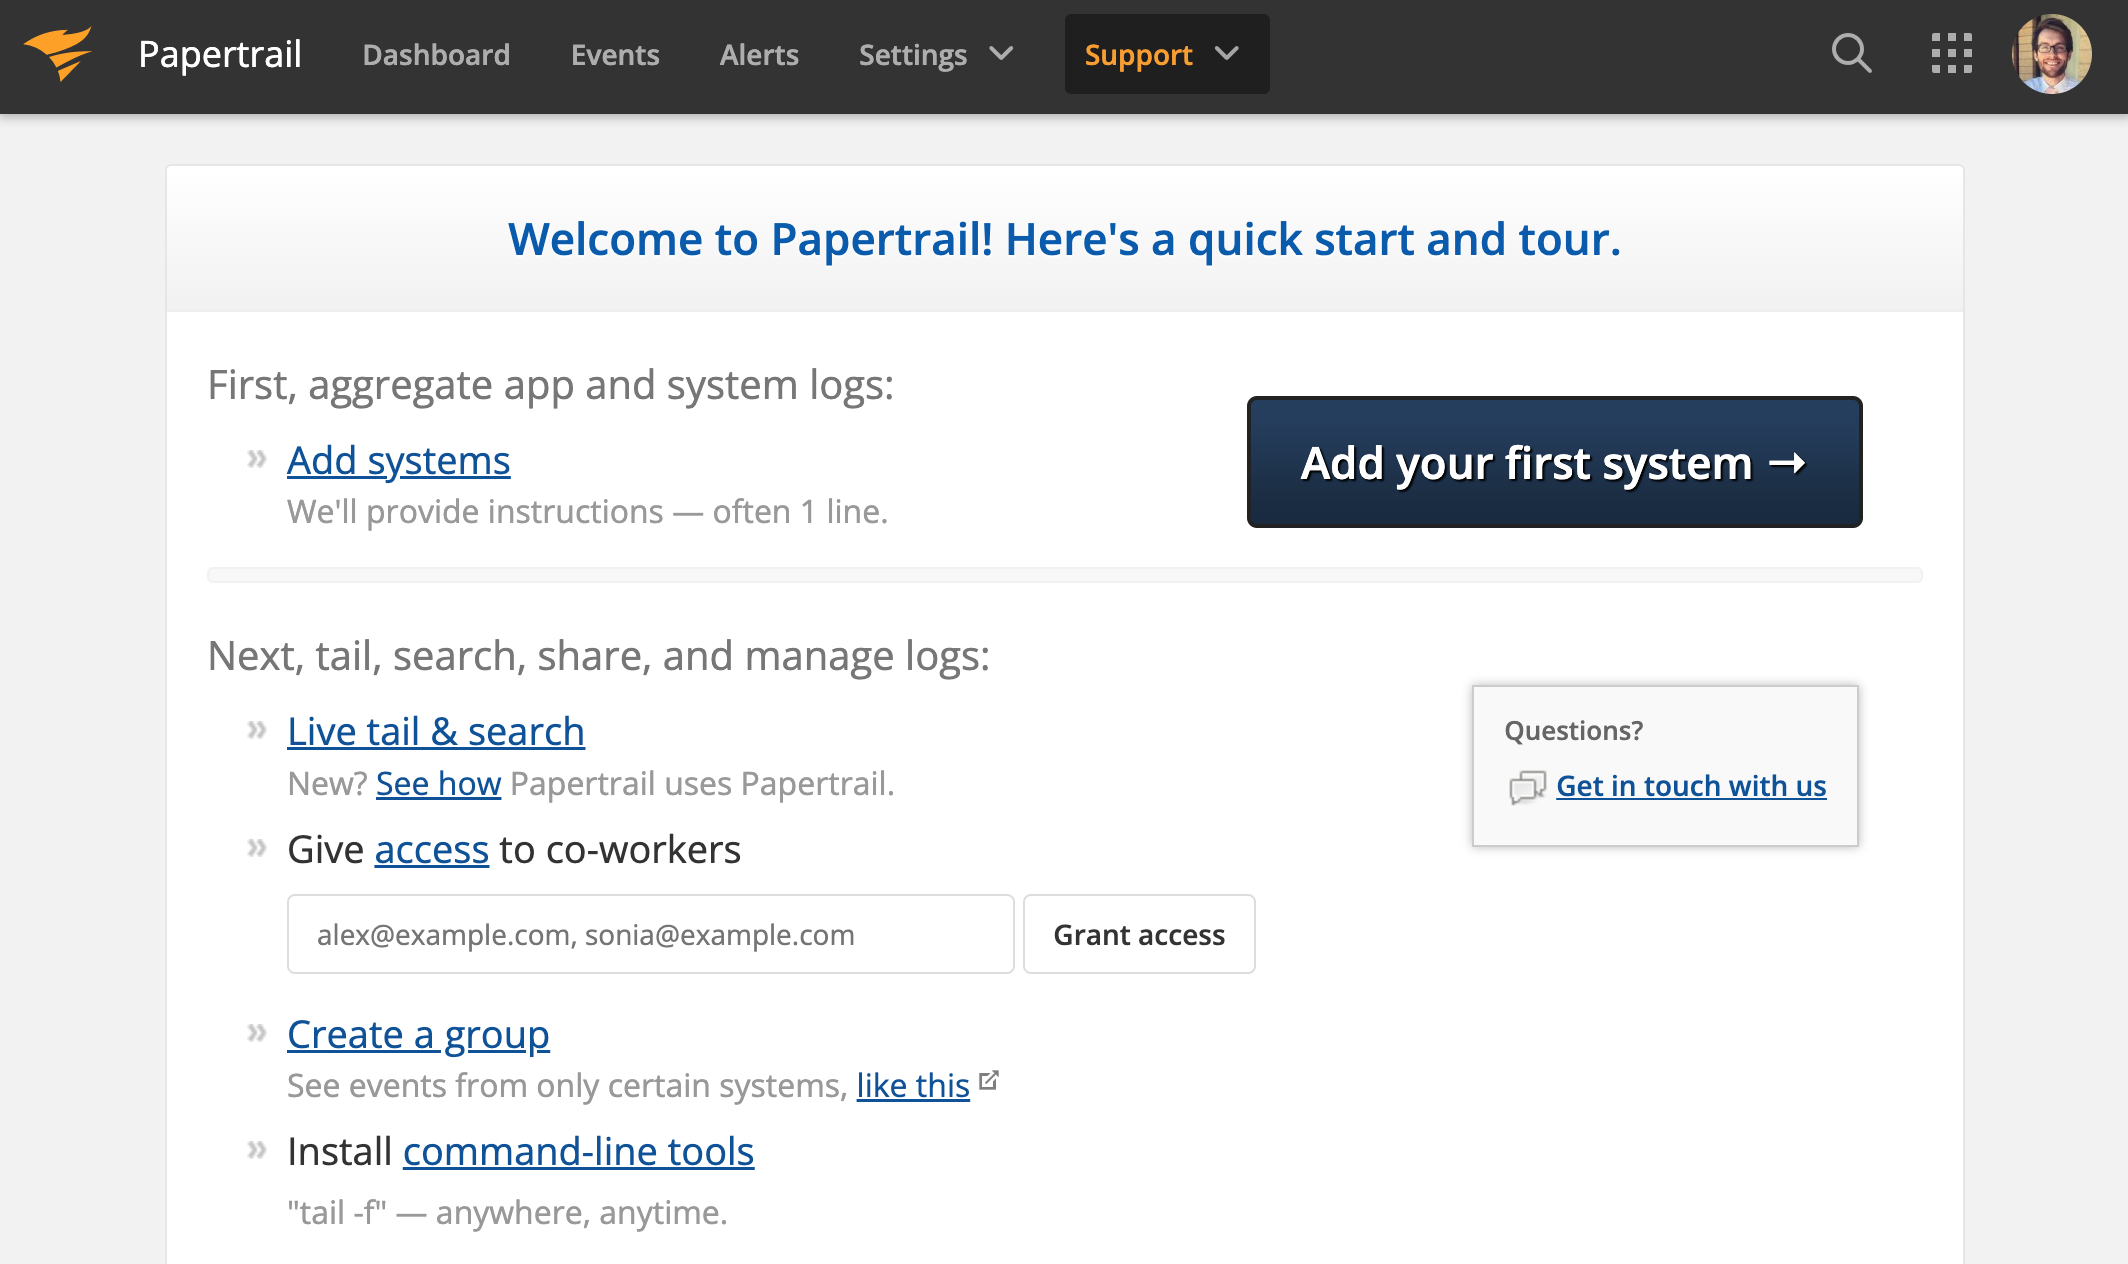 Adding your first system in Papertrail